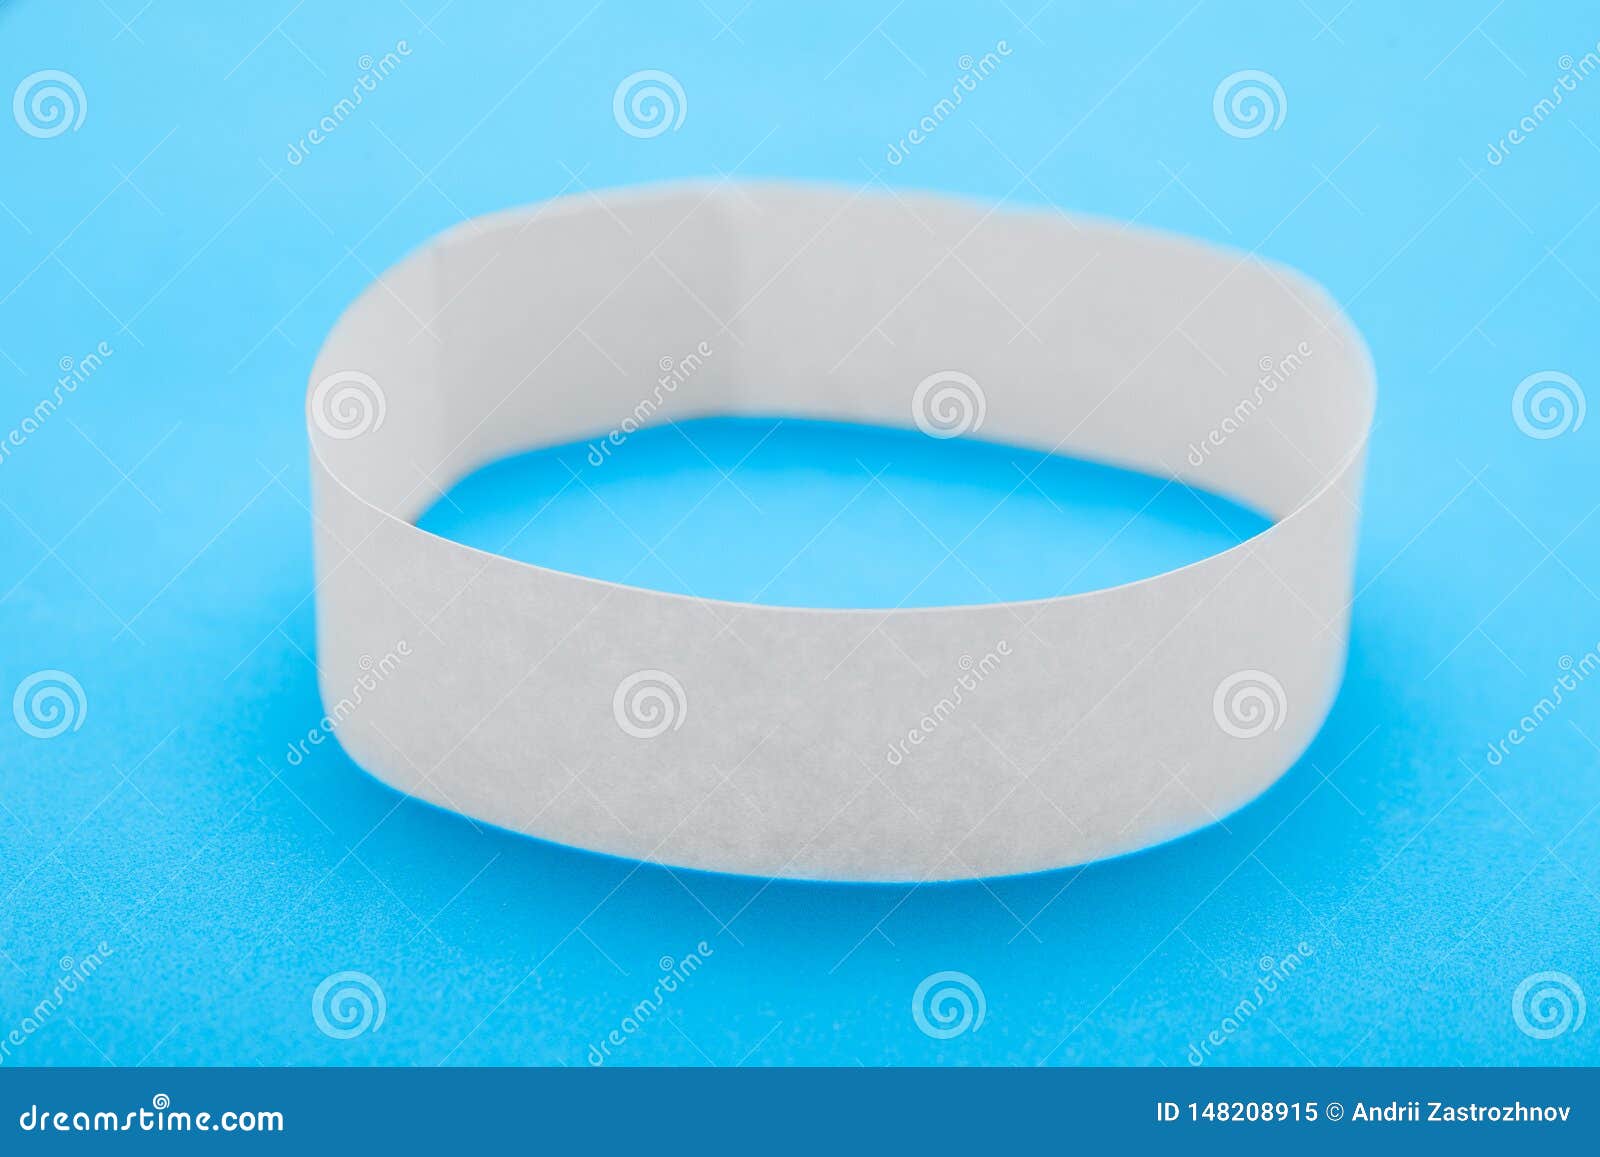 Download Empty Event Wristband Mockup. Blue Background Stock Image ...